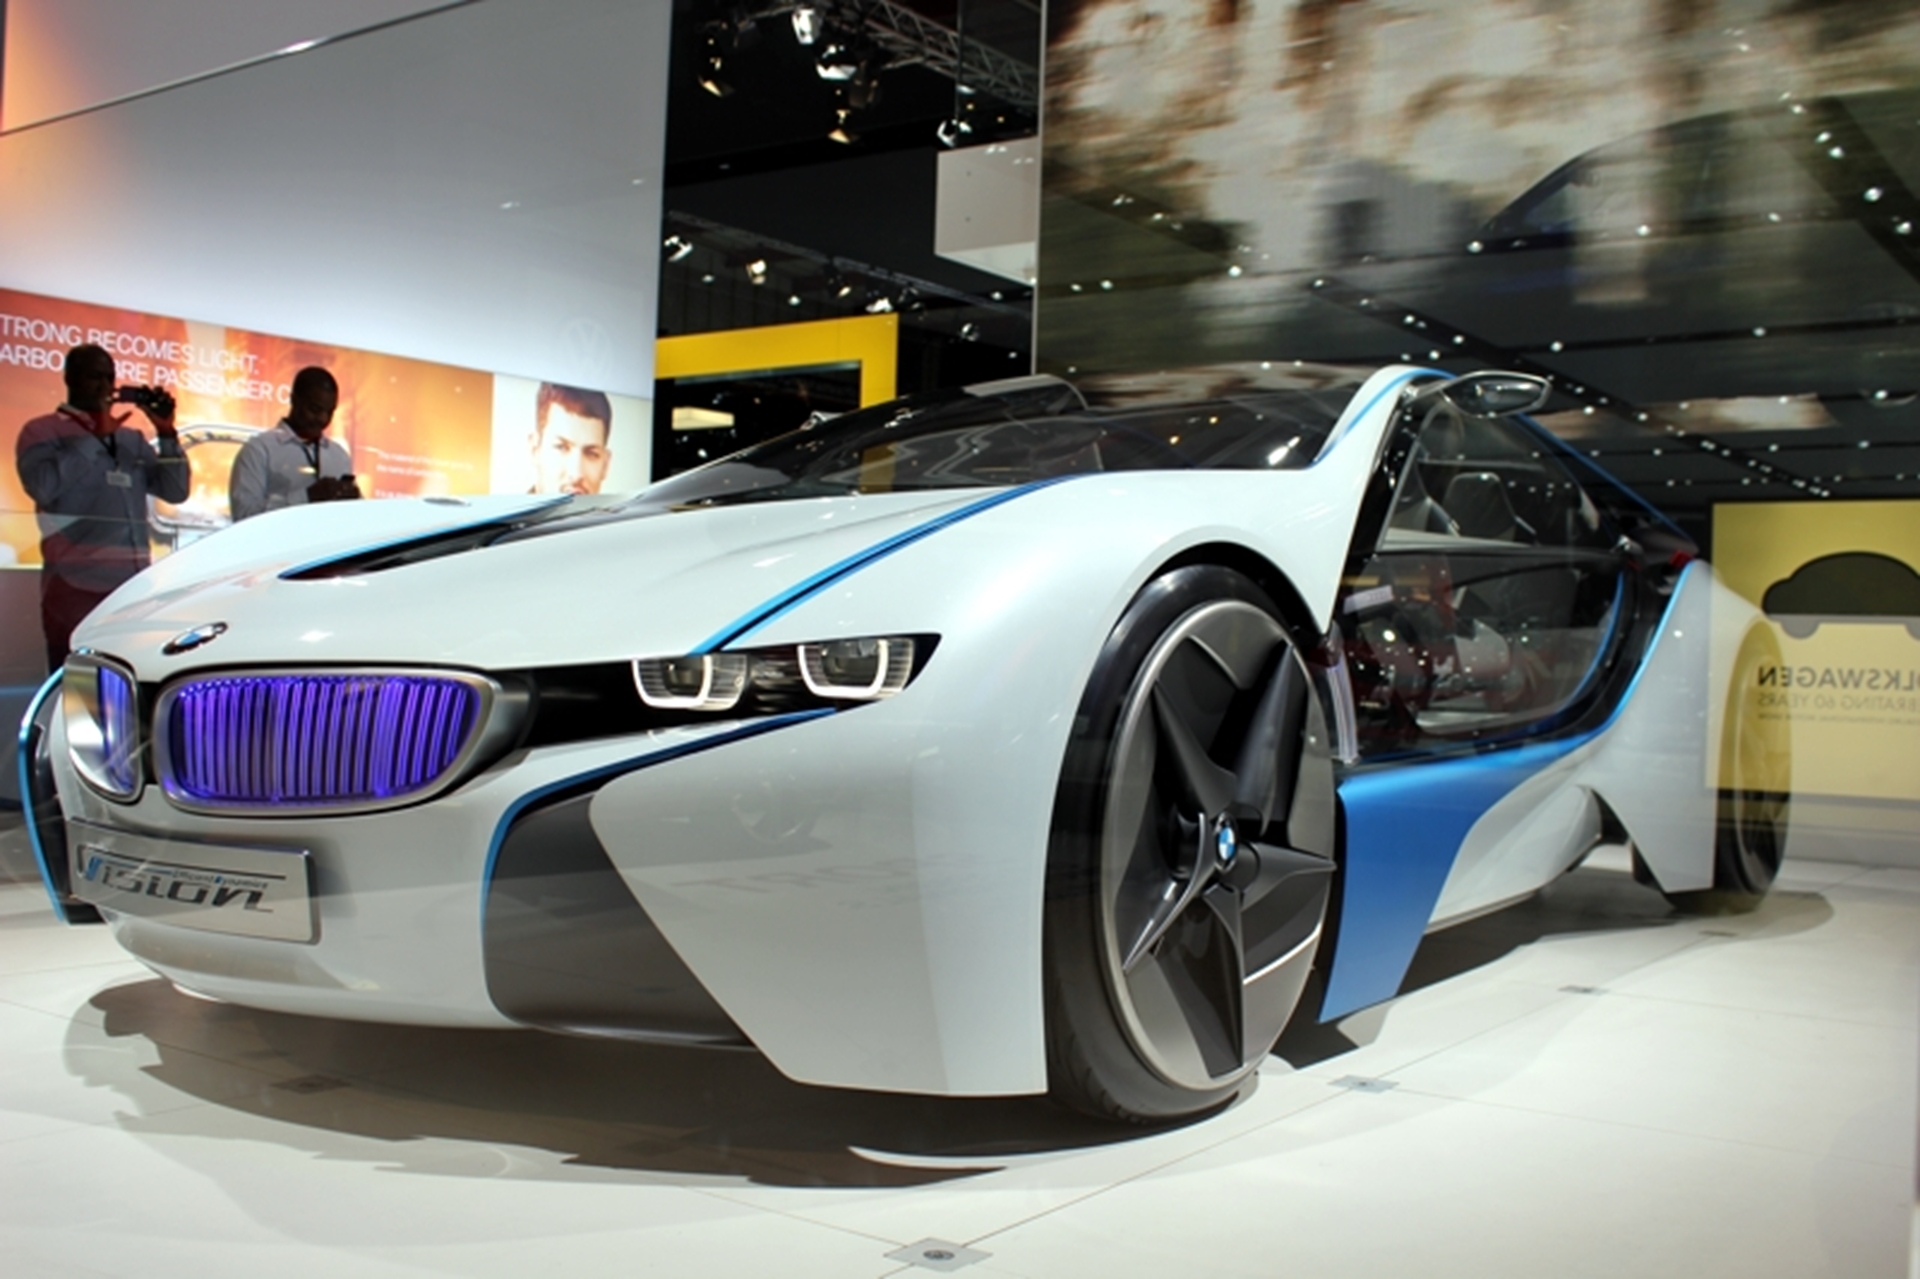 BMW i8 Concept Car from Mission Impossible 4 a big hit on the internet